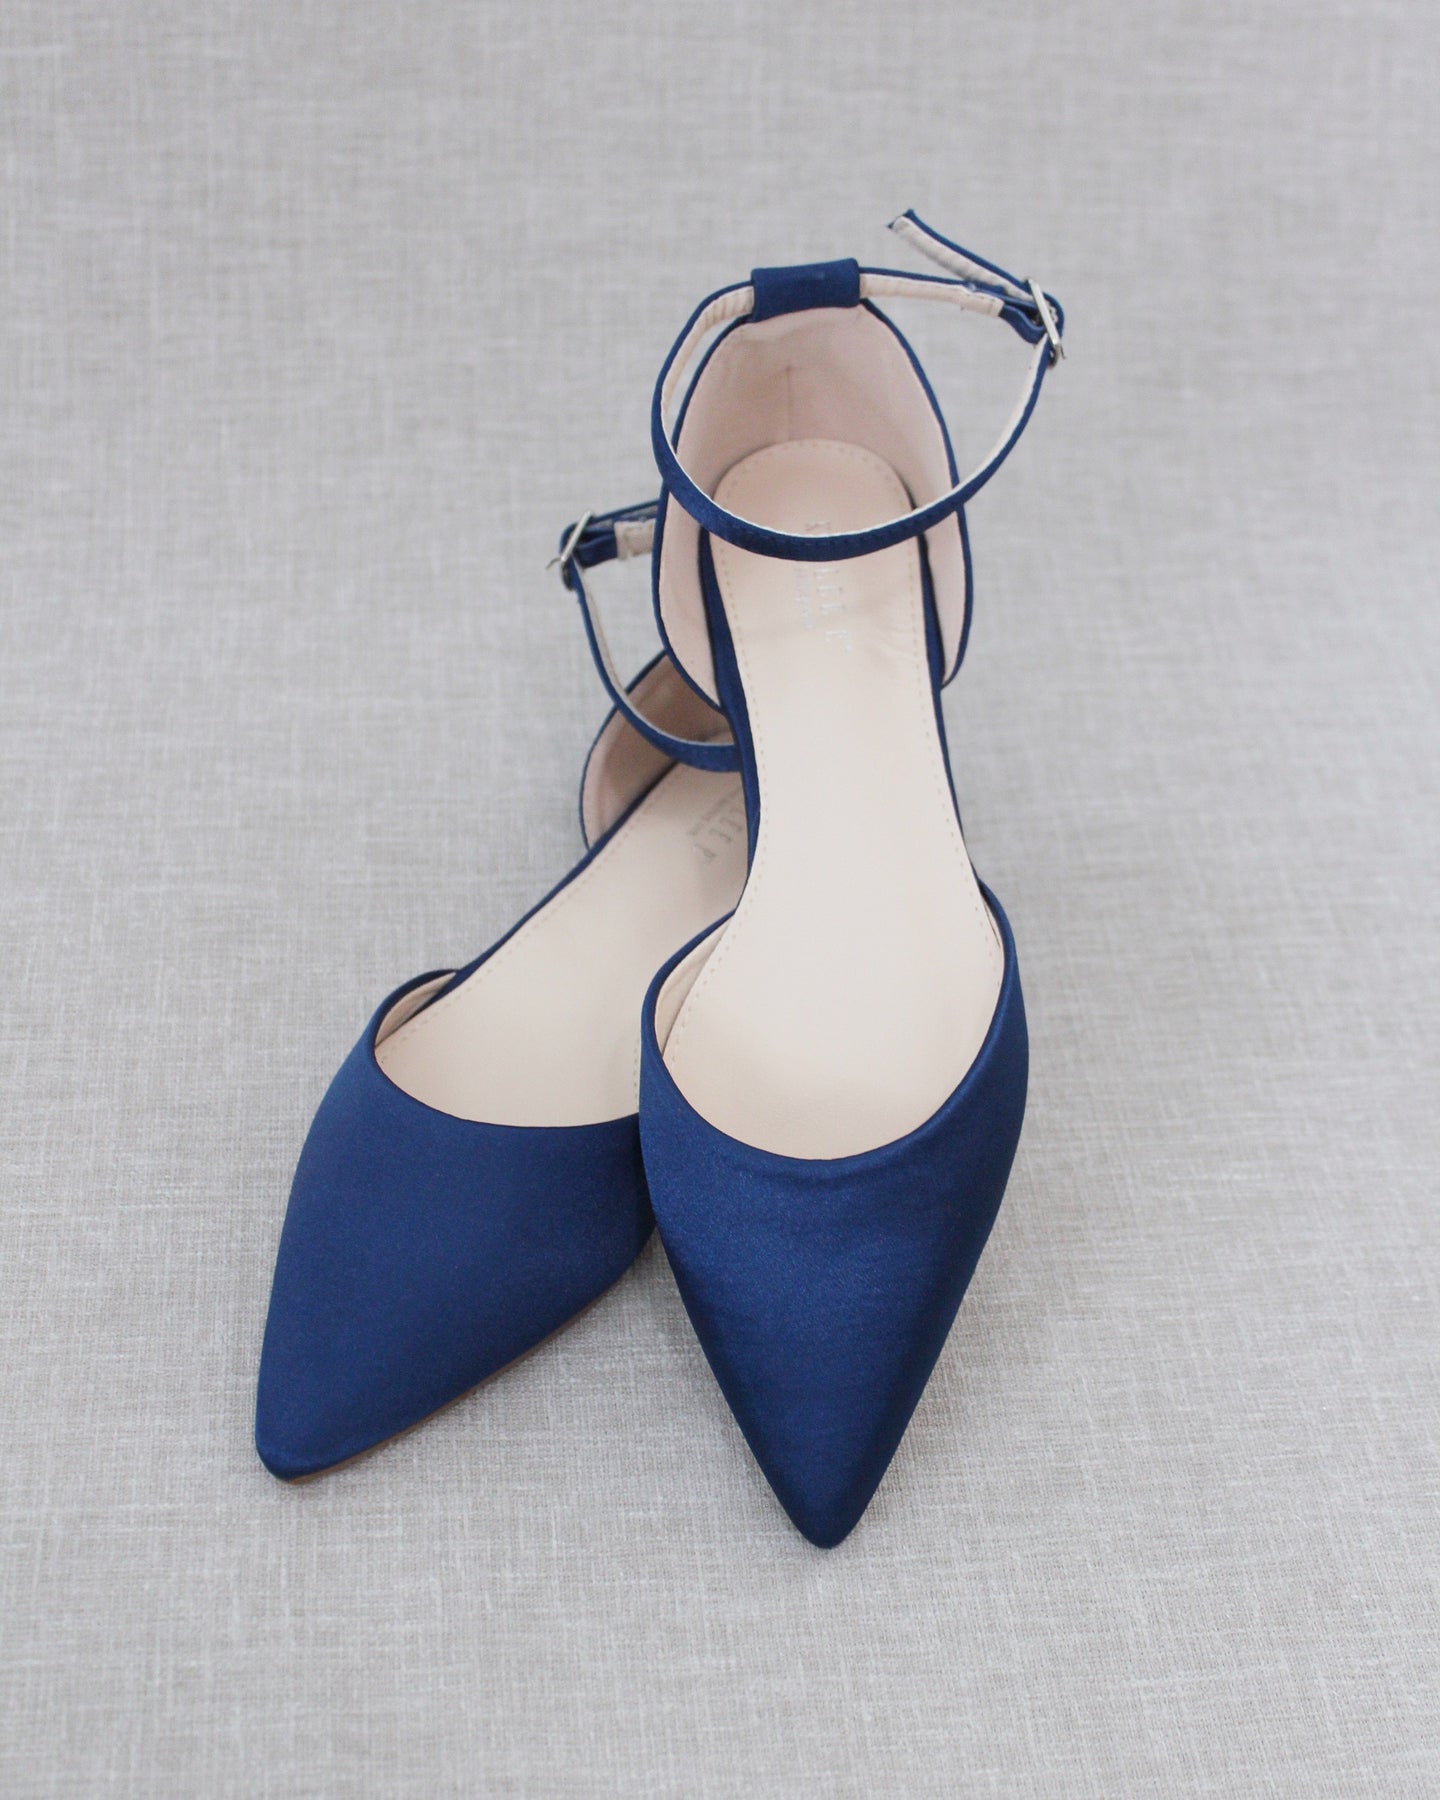 Navy Satin Pointy Toe Flats with Ankle Strap - Wedding Shoes, Bridal ...